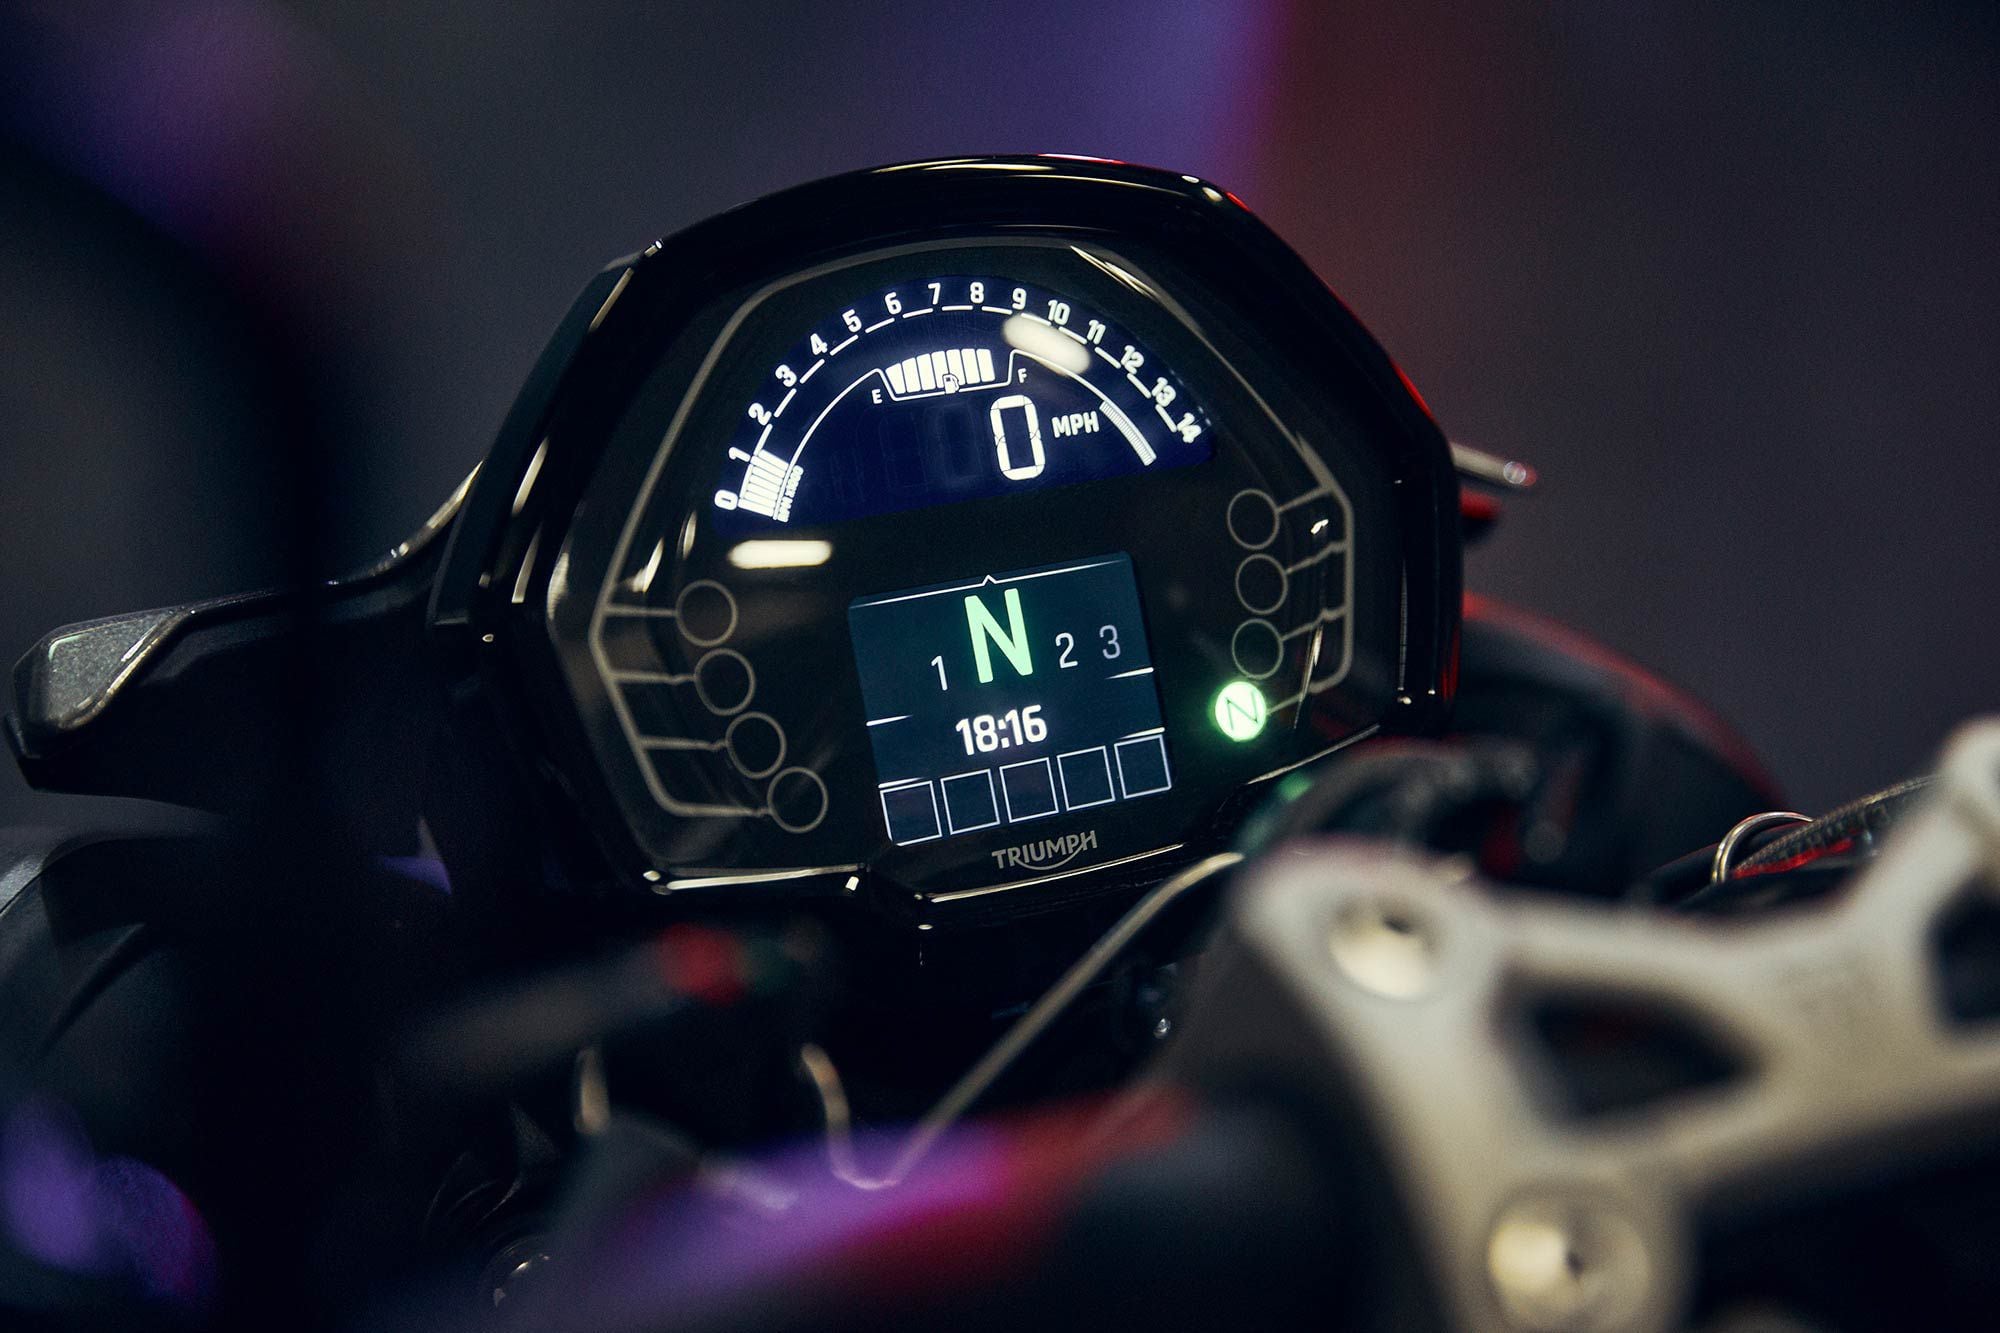 The base Street Triple 765 R’s LCD and (sorta) TFT with “key information” like gearing.